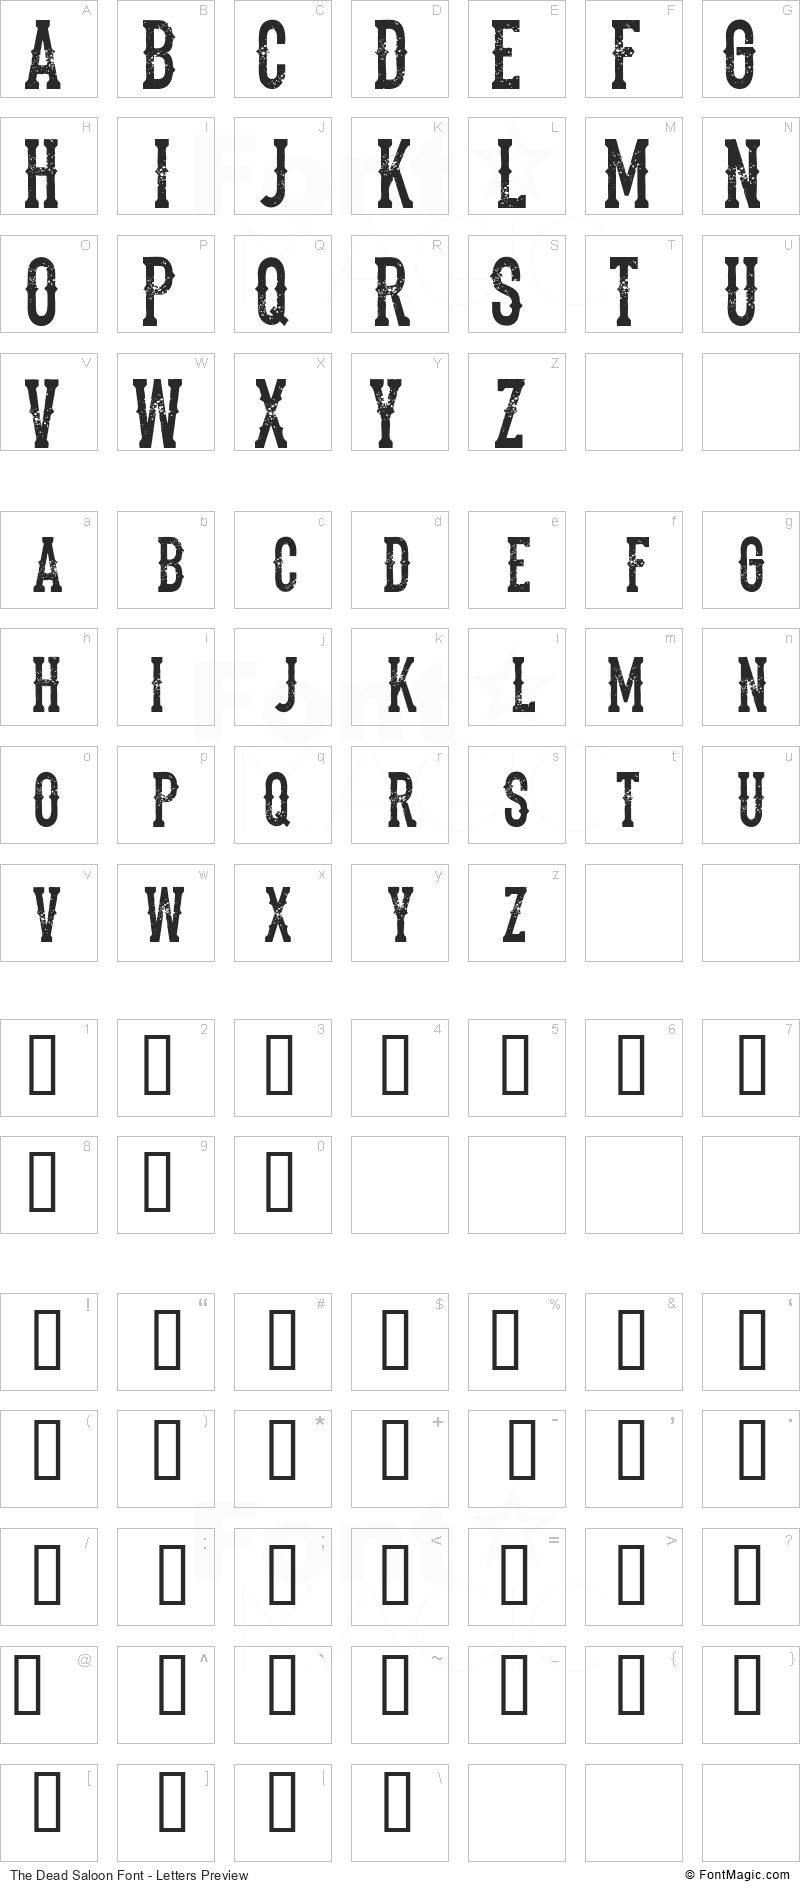 The Dead Saloon Font - All Latters Preview Chart